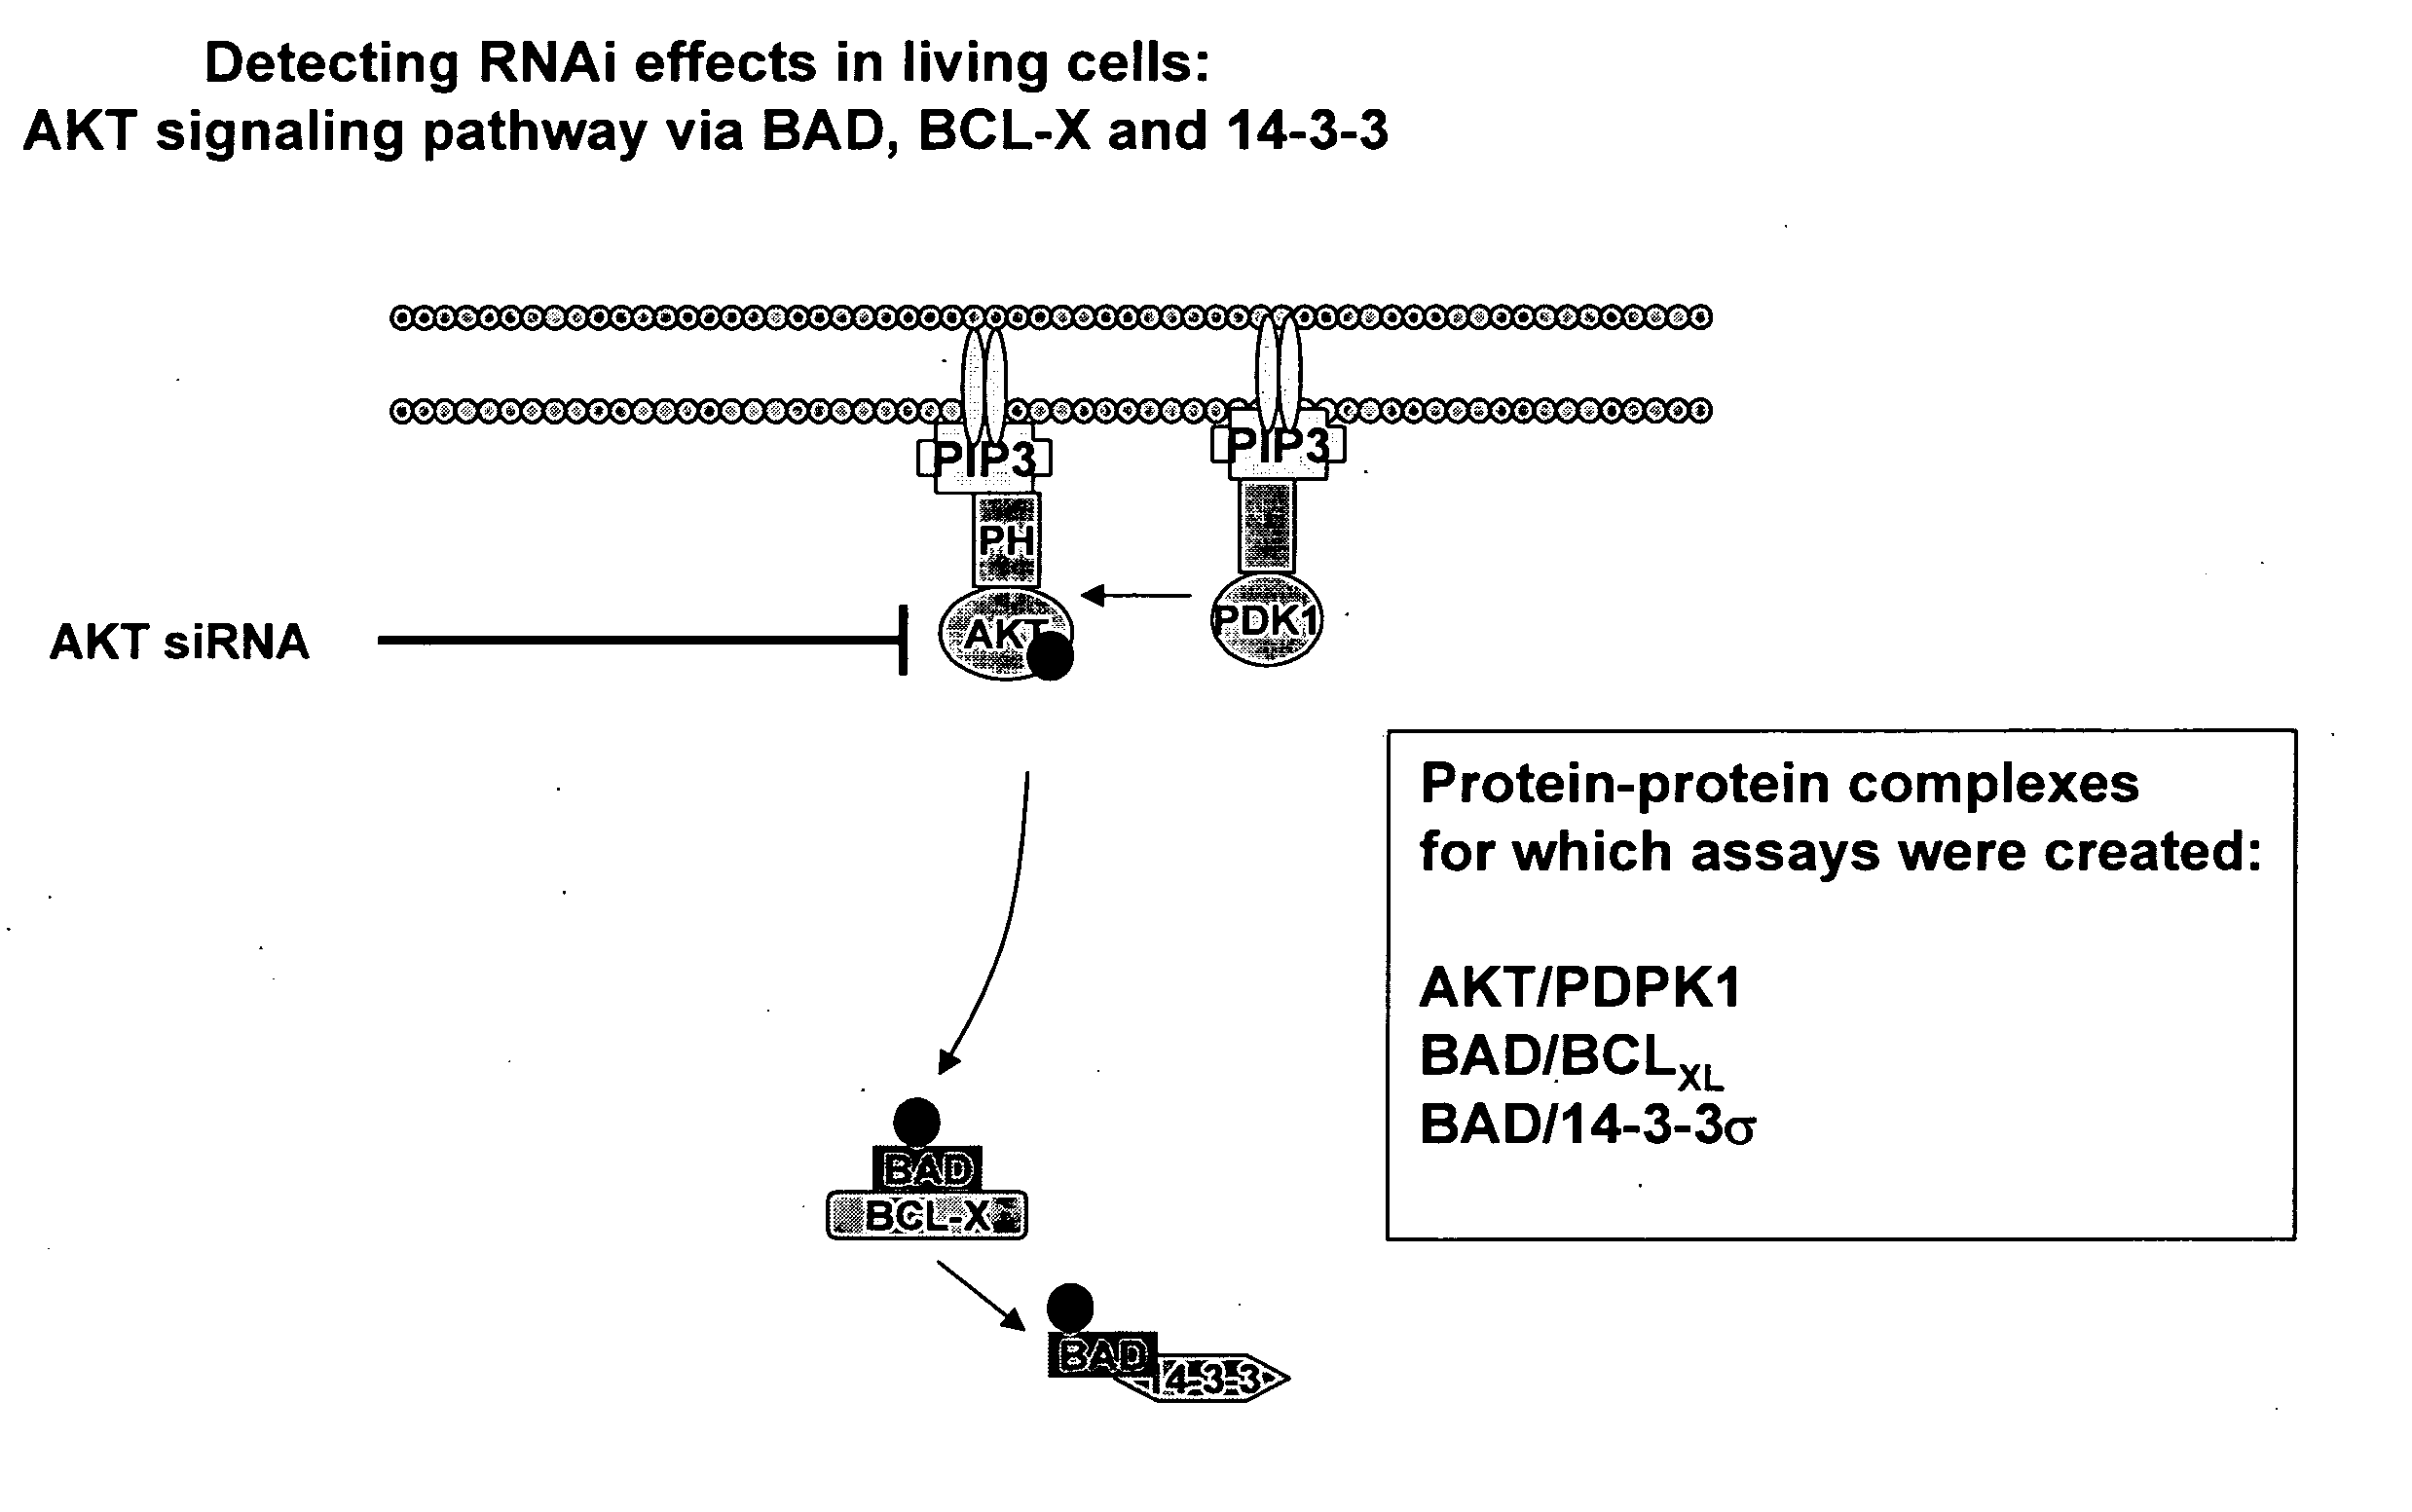 Monitoring gene silencing and annotating gene function in living cells